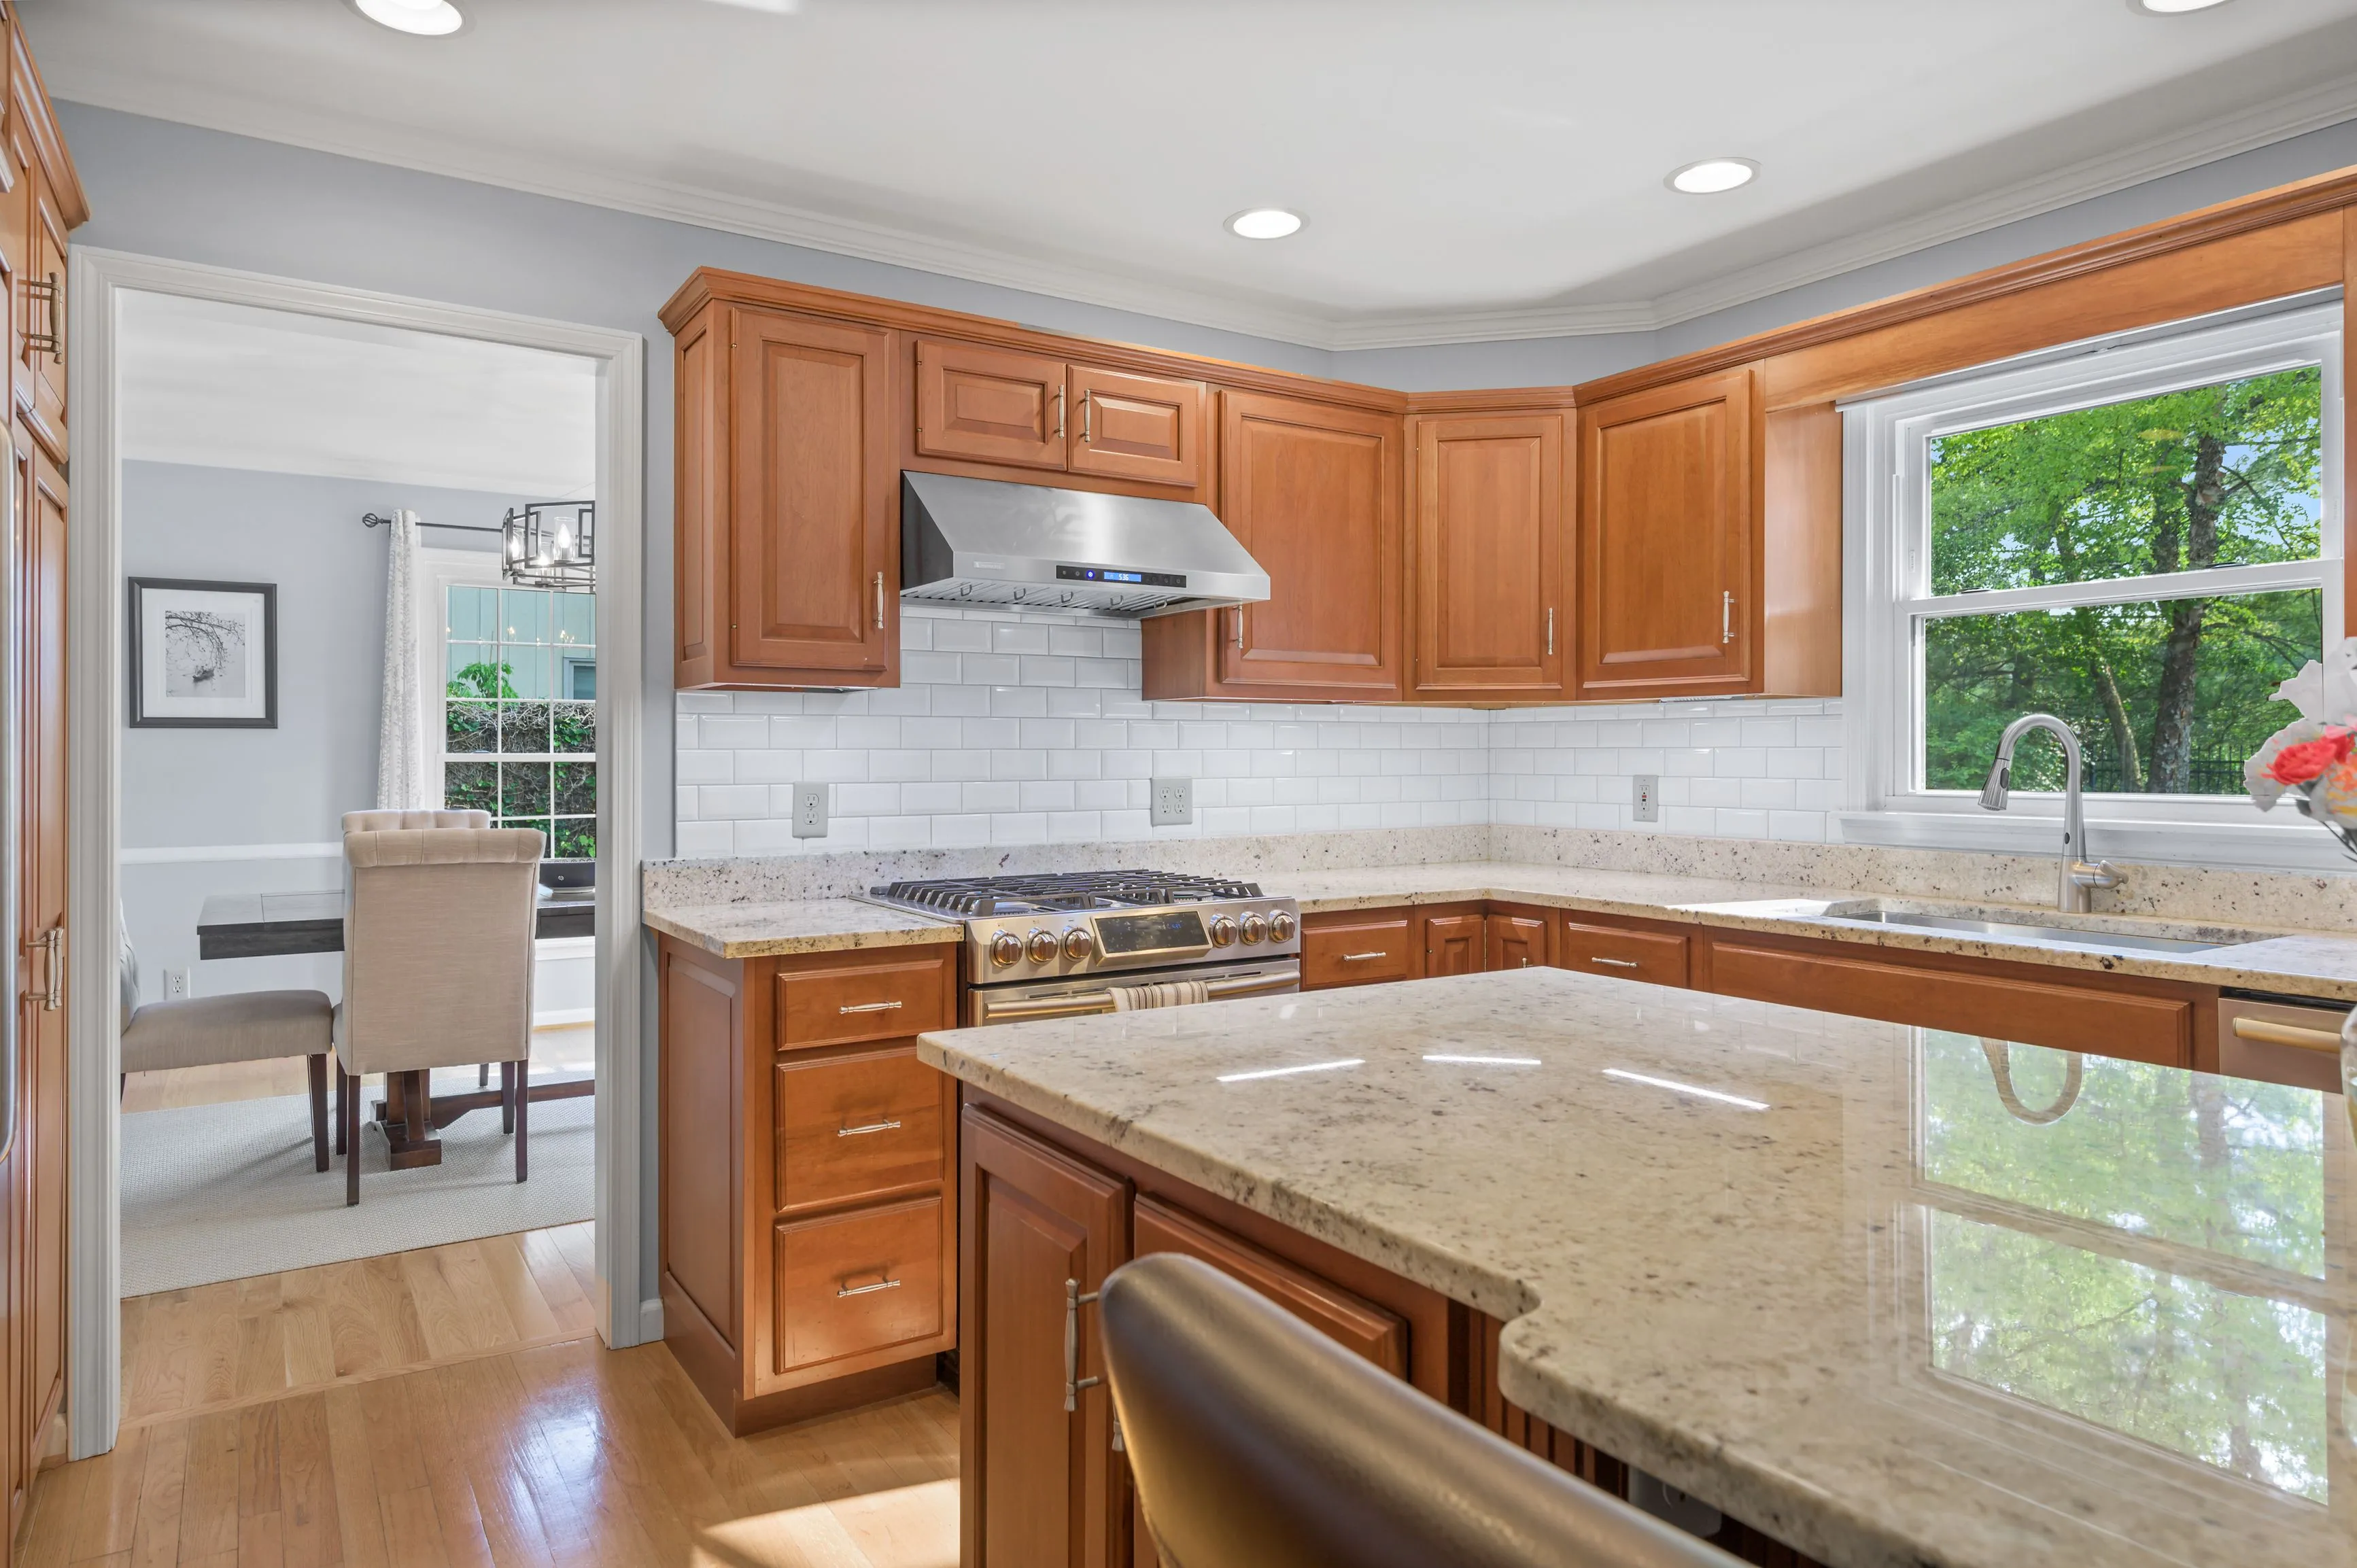 Spacious kitchen interior with wooden cabinets, granite countertops, and stainless steel appliances, featuring a central island and hardwood flooring.